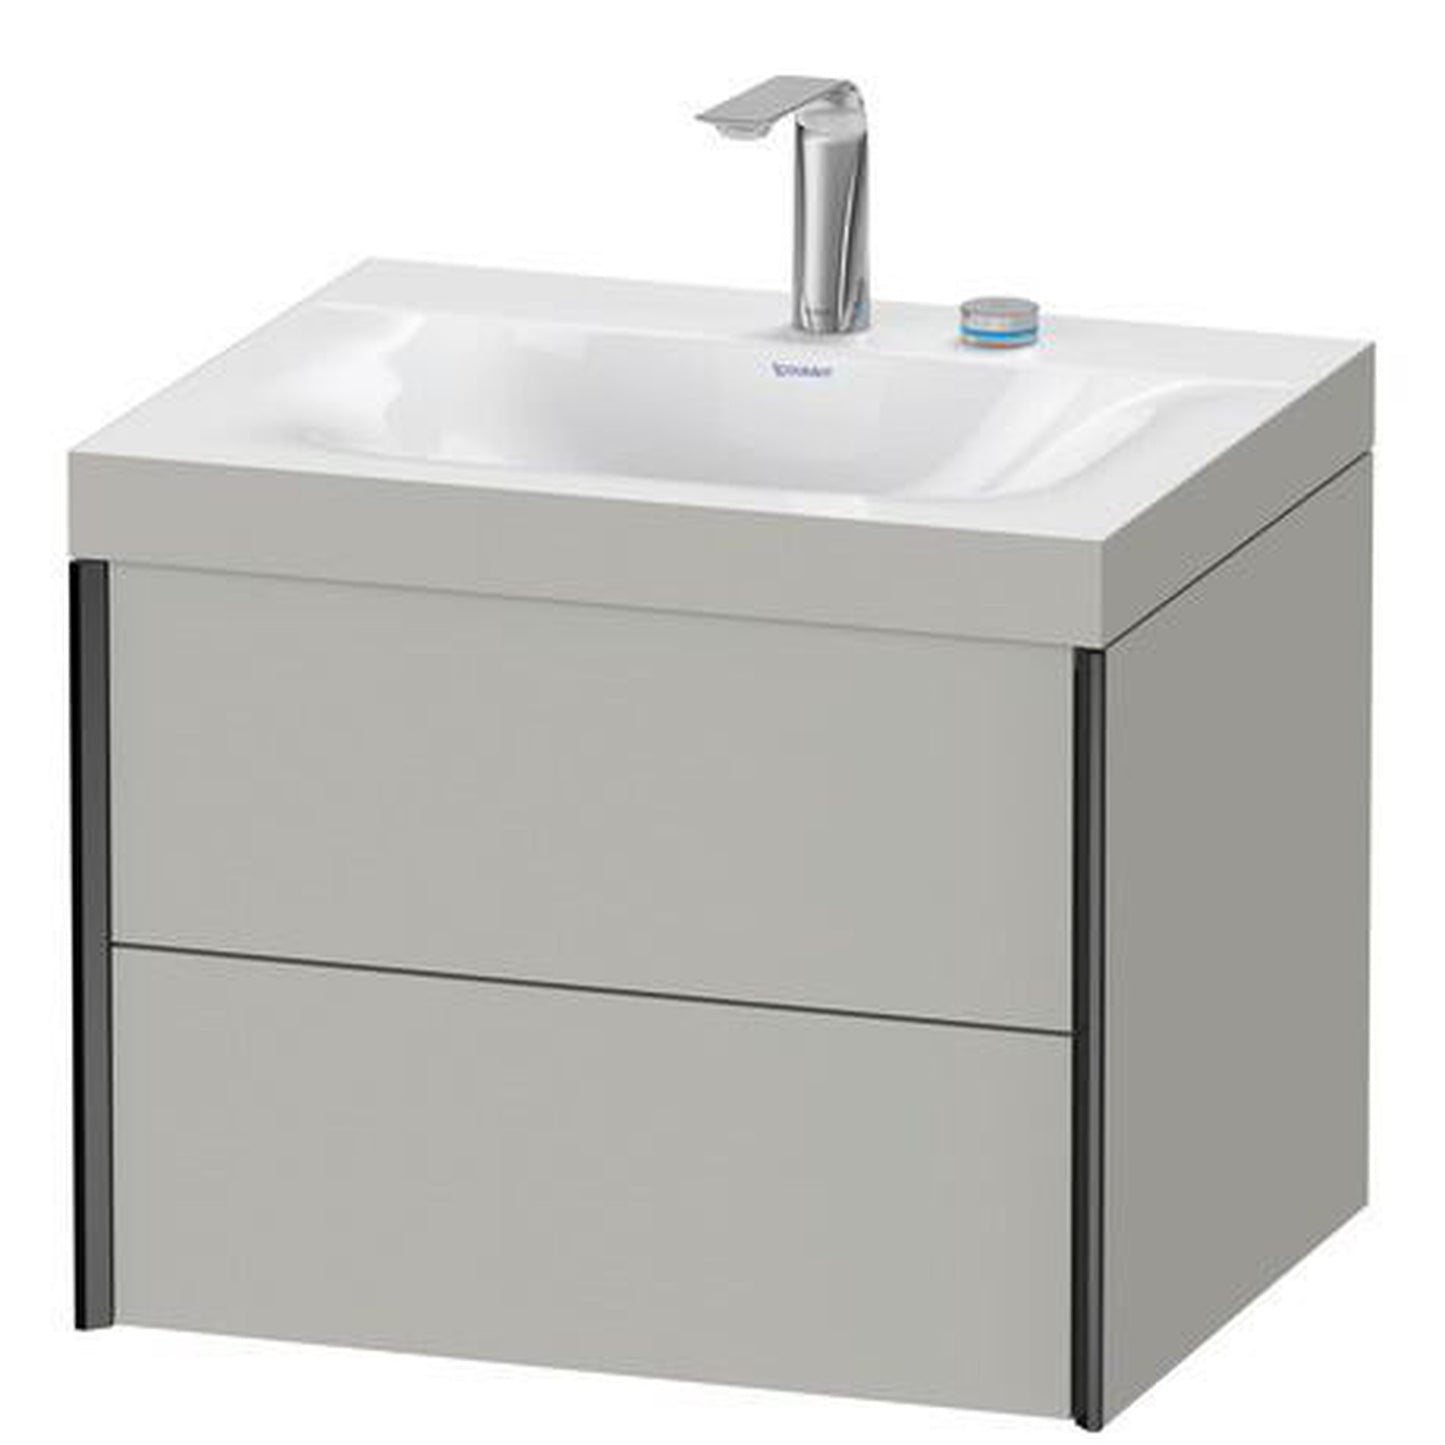 Duravit Xviu 24" x 20" x 19" Two Drawer C-Bonded Wall-Mount Vanity Kit With Two Tap Holes, Concrete Gray (XV4614EB207C)